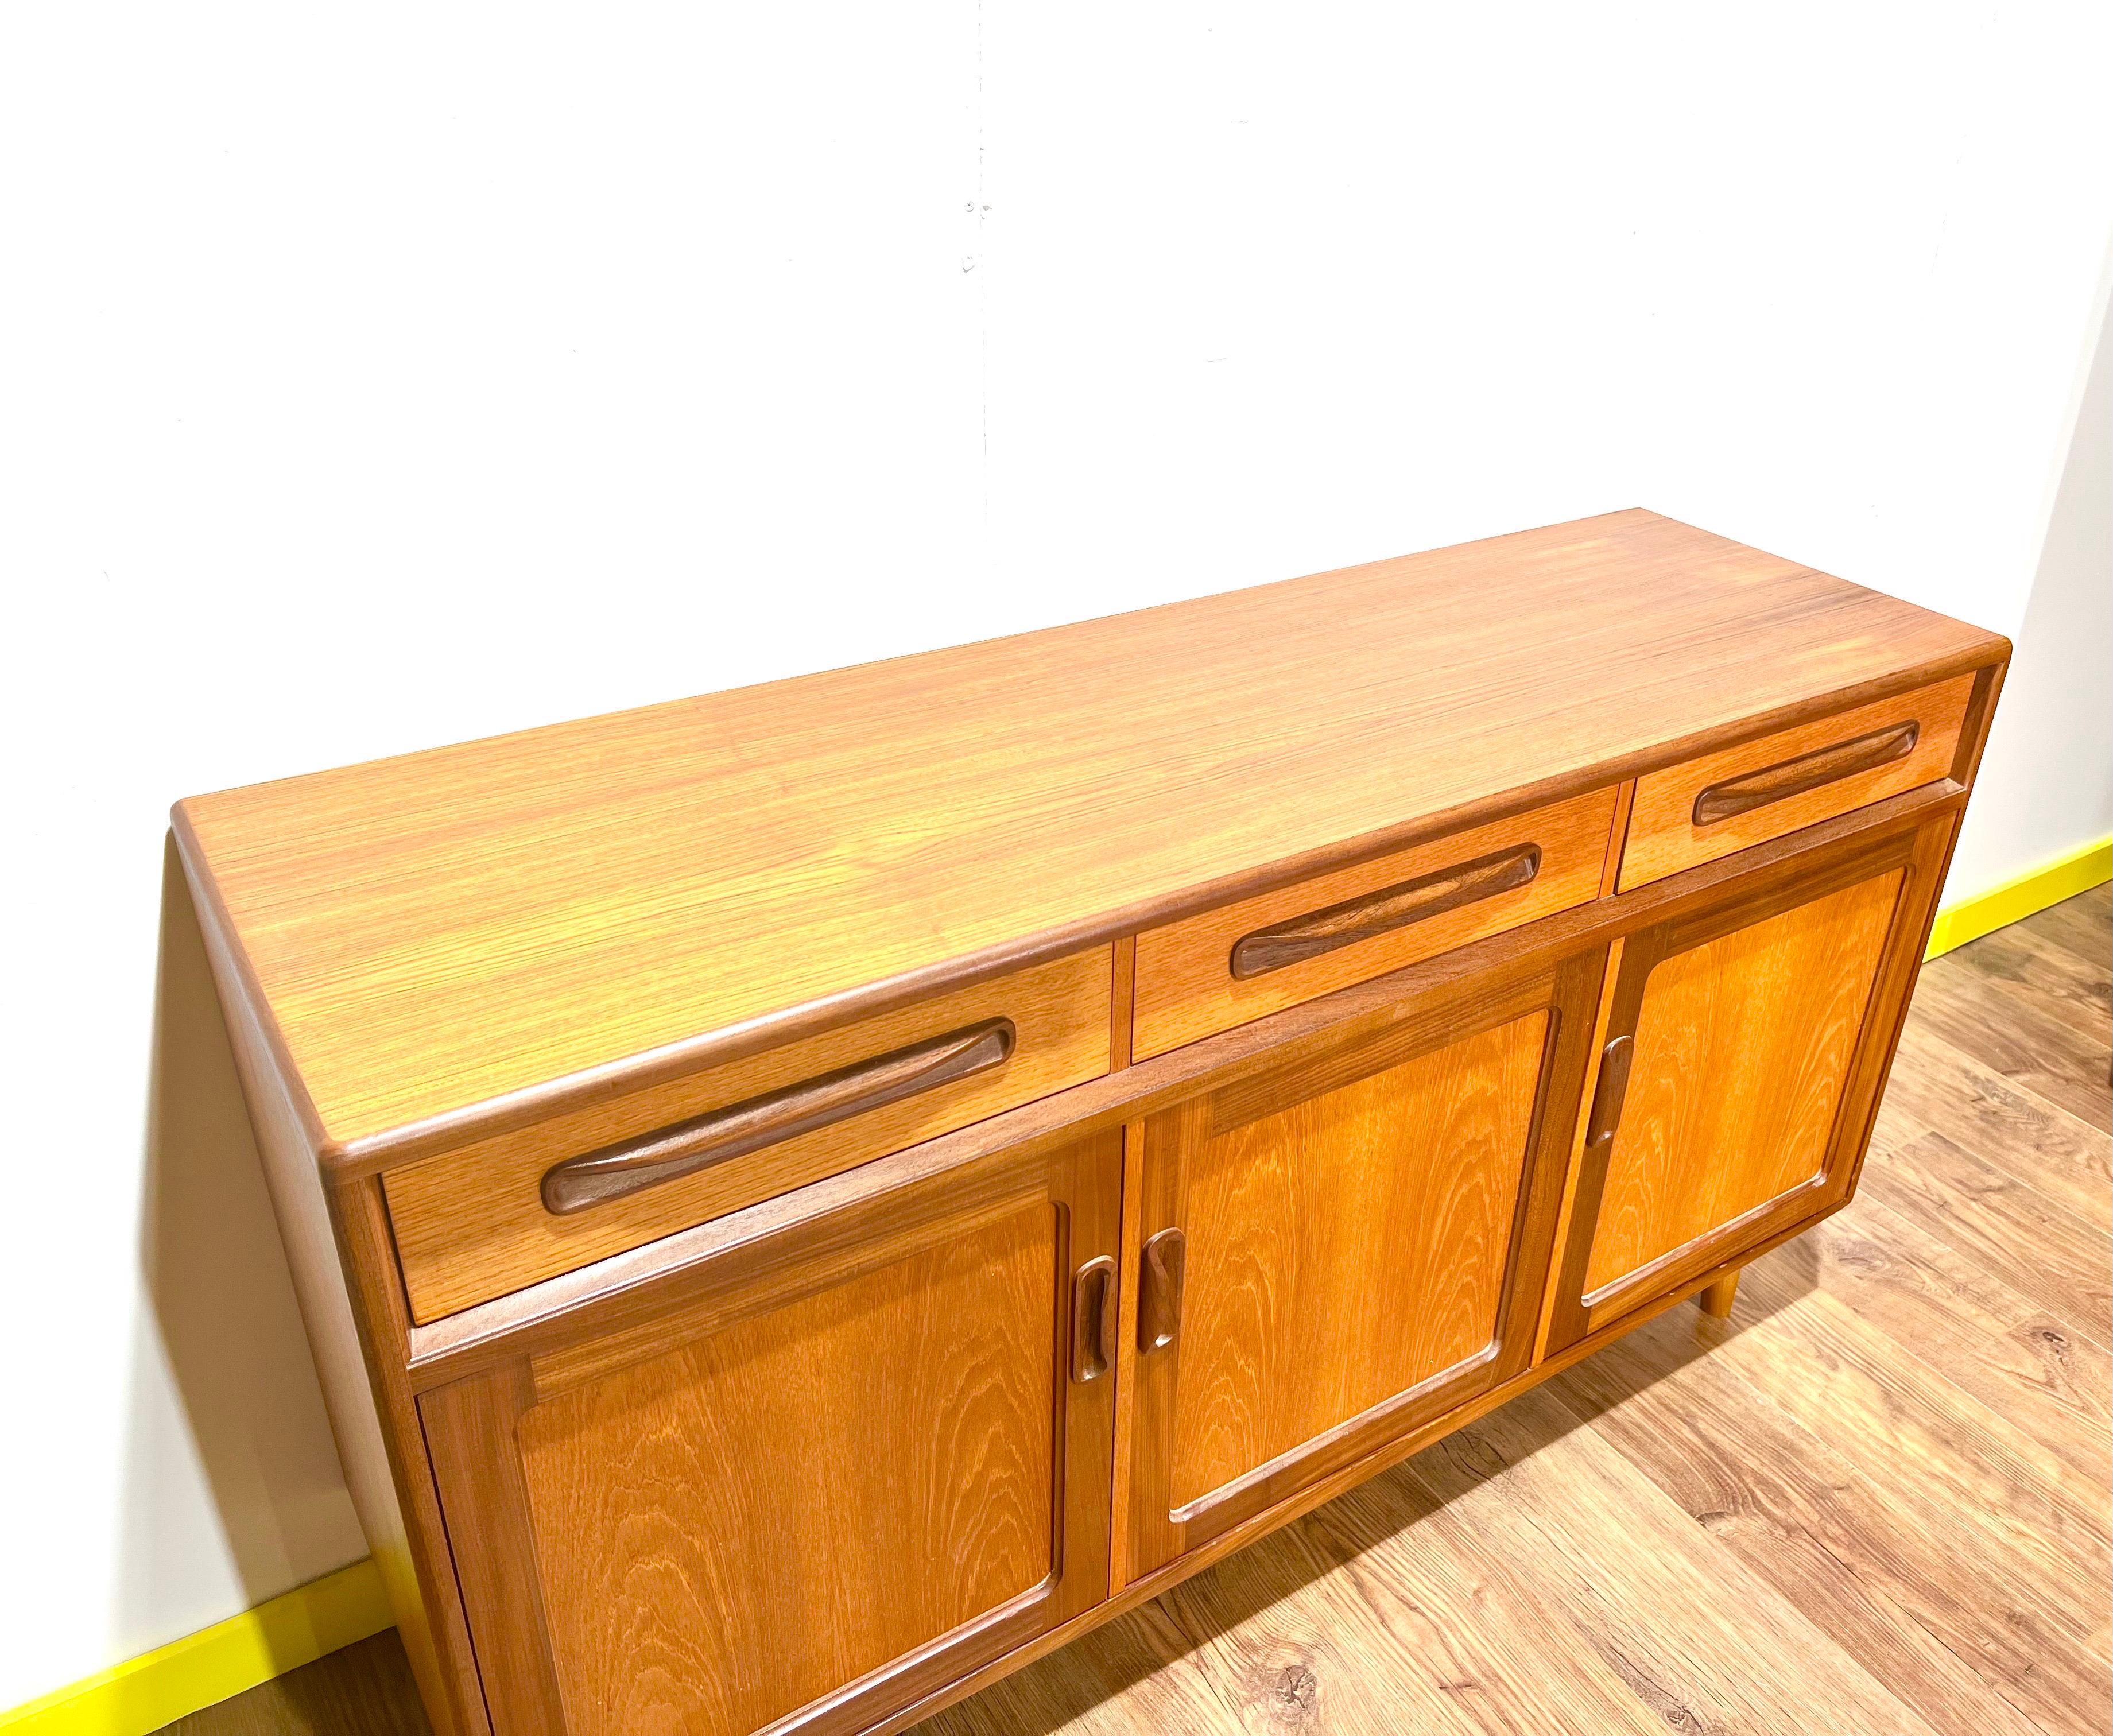 We are delighted to offer this superb piece of mid century furniture, a masterfully designed and handmade teak Fresco Sideboard by Victor Wilkins for G-Plan. The sideboard dates to the 1960s and represents one of the most iconic examples of British